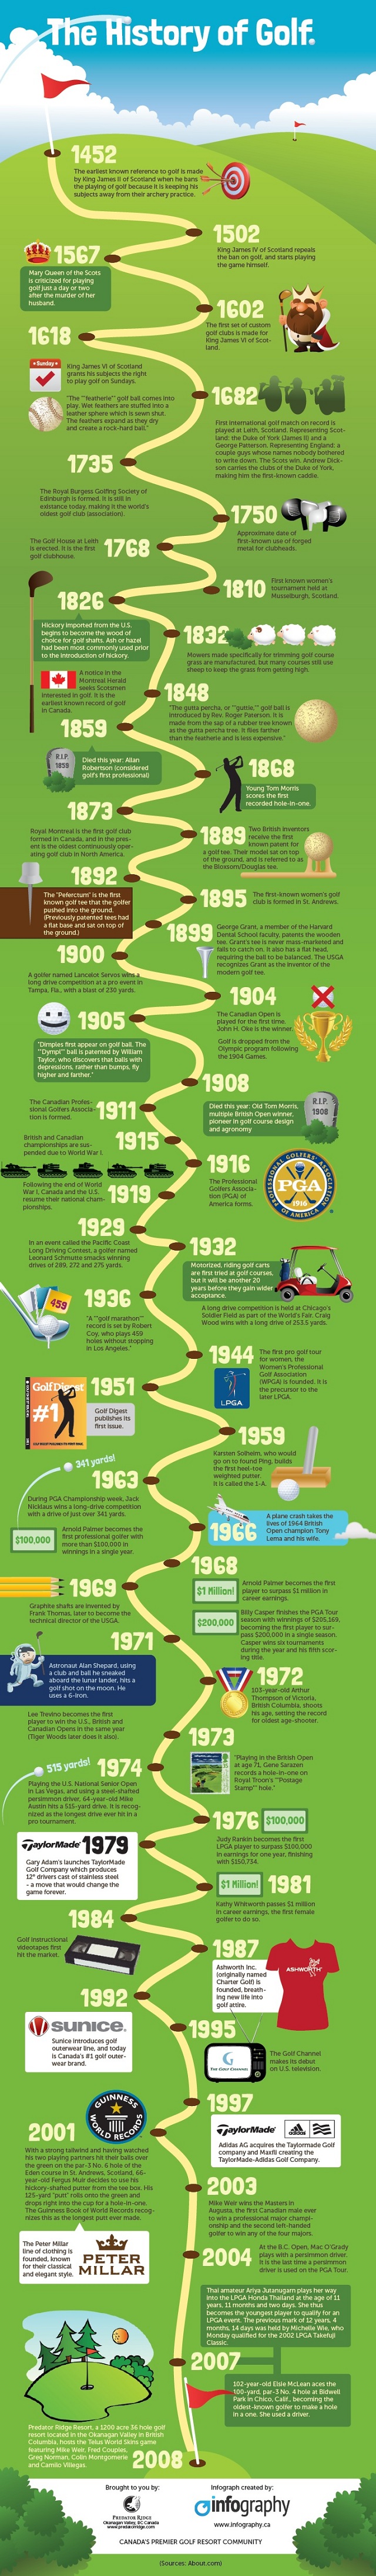 Infographic about the history of golf